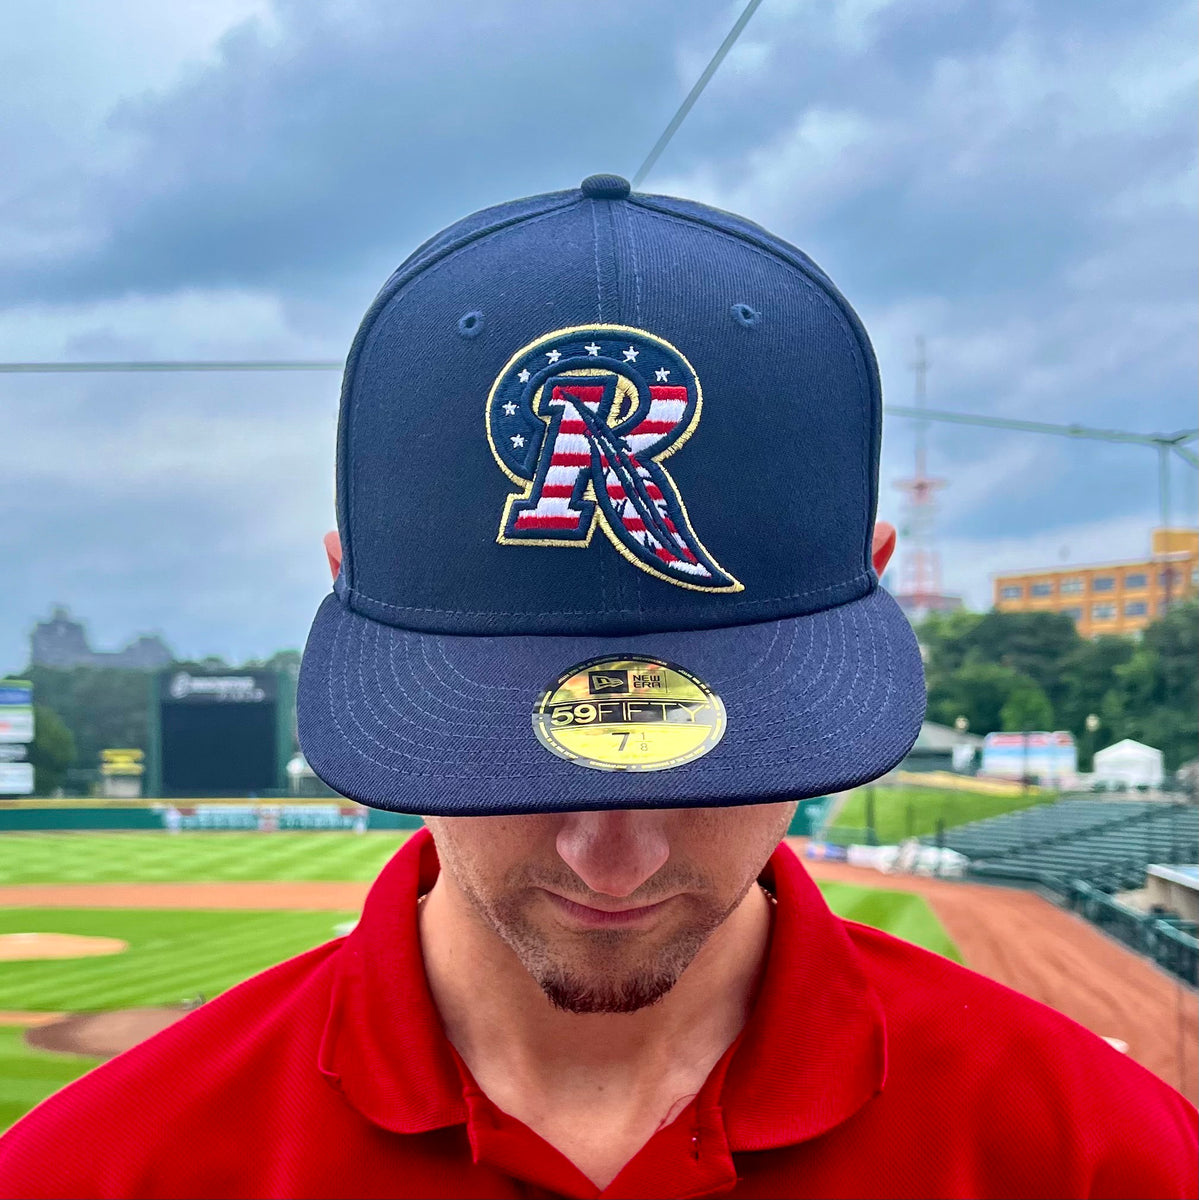 Rochester Red Wings x Marvel: Youth Adjustable Cap – Rochester Red